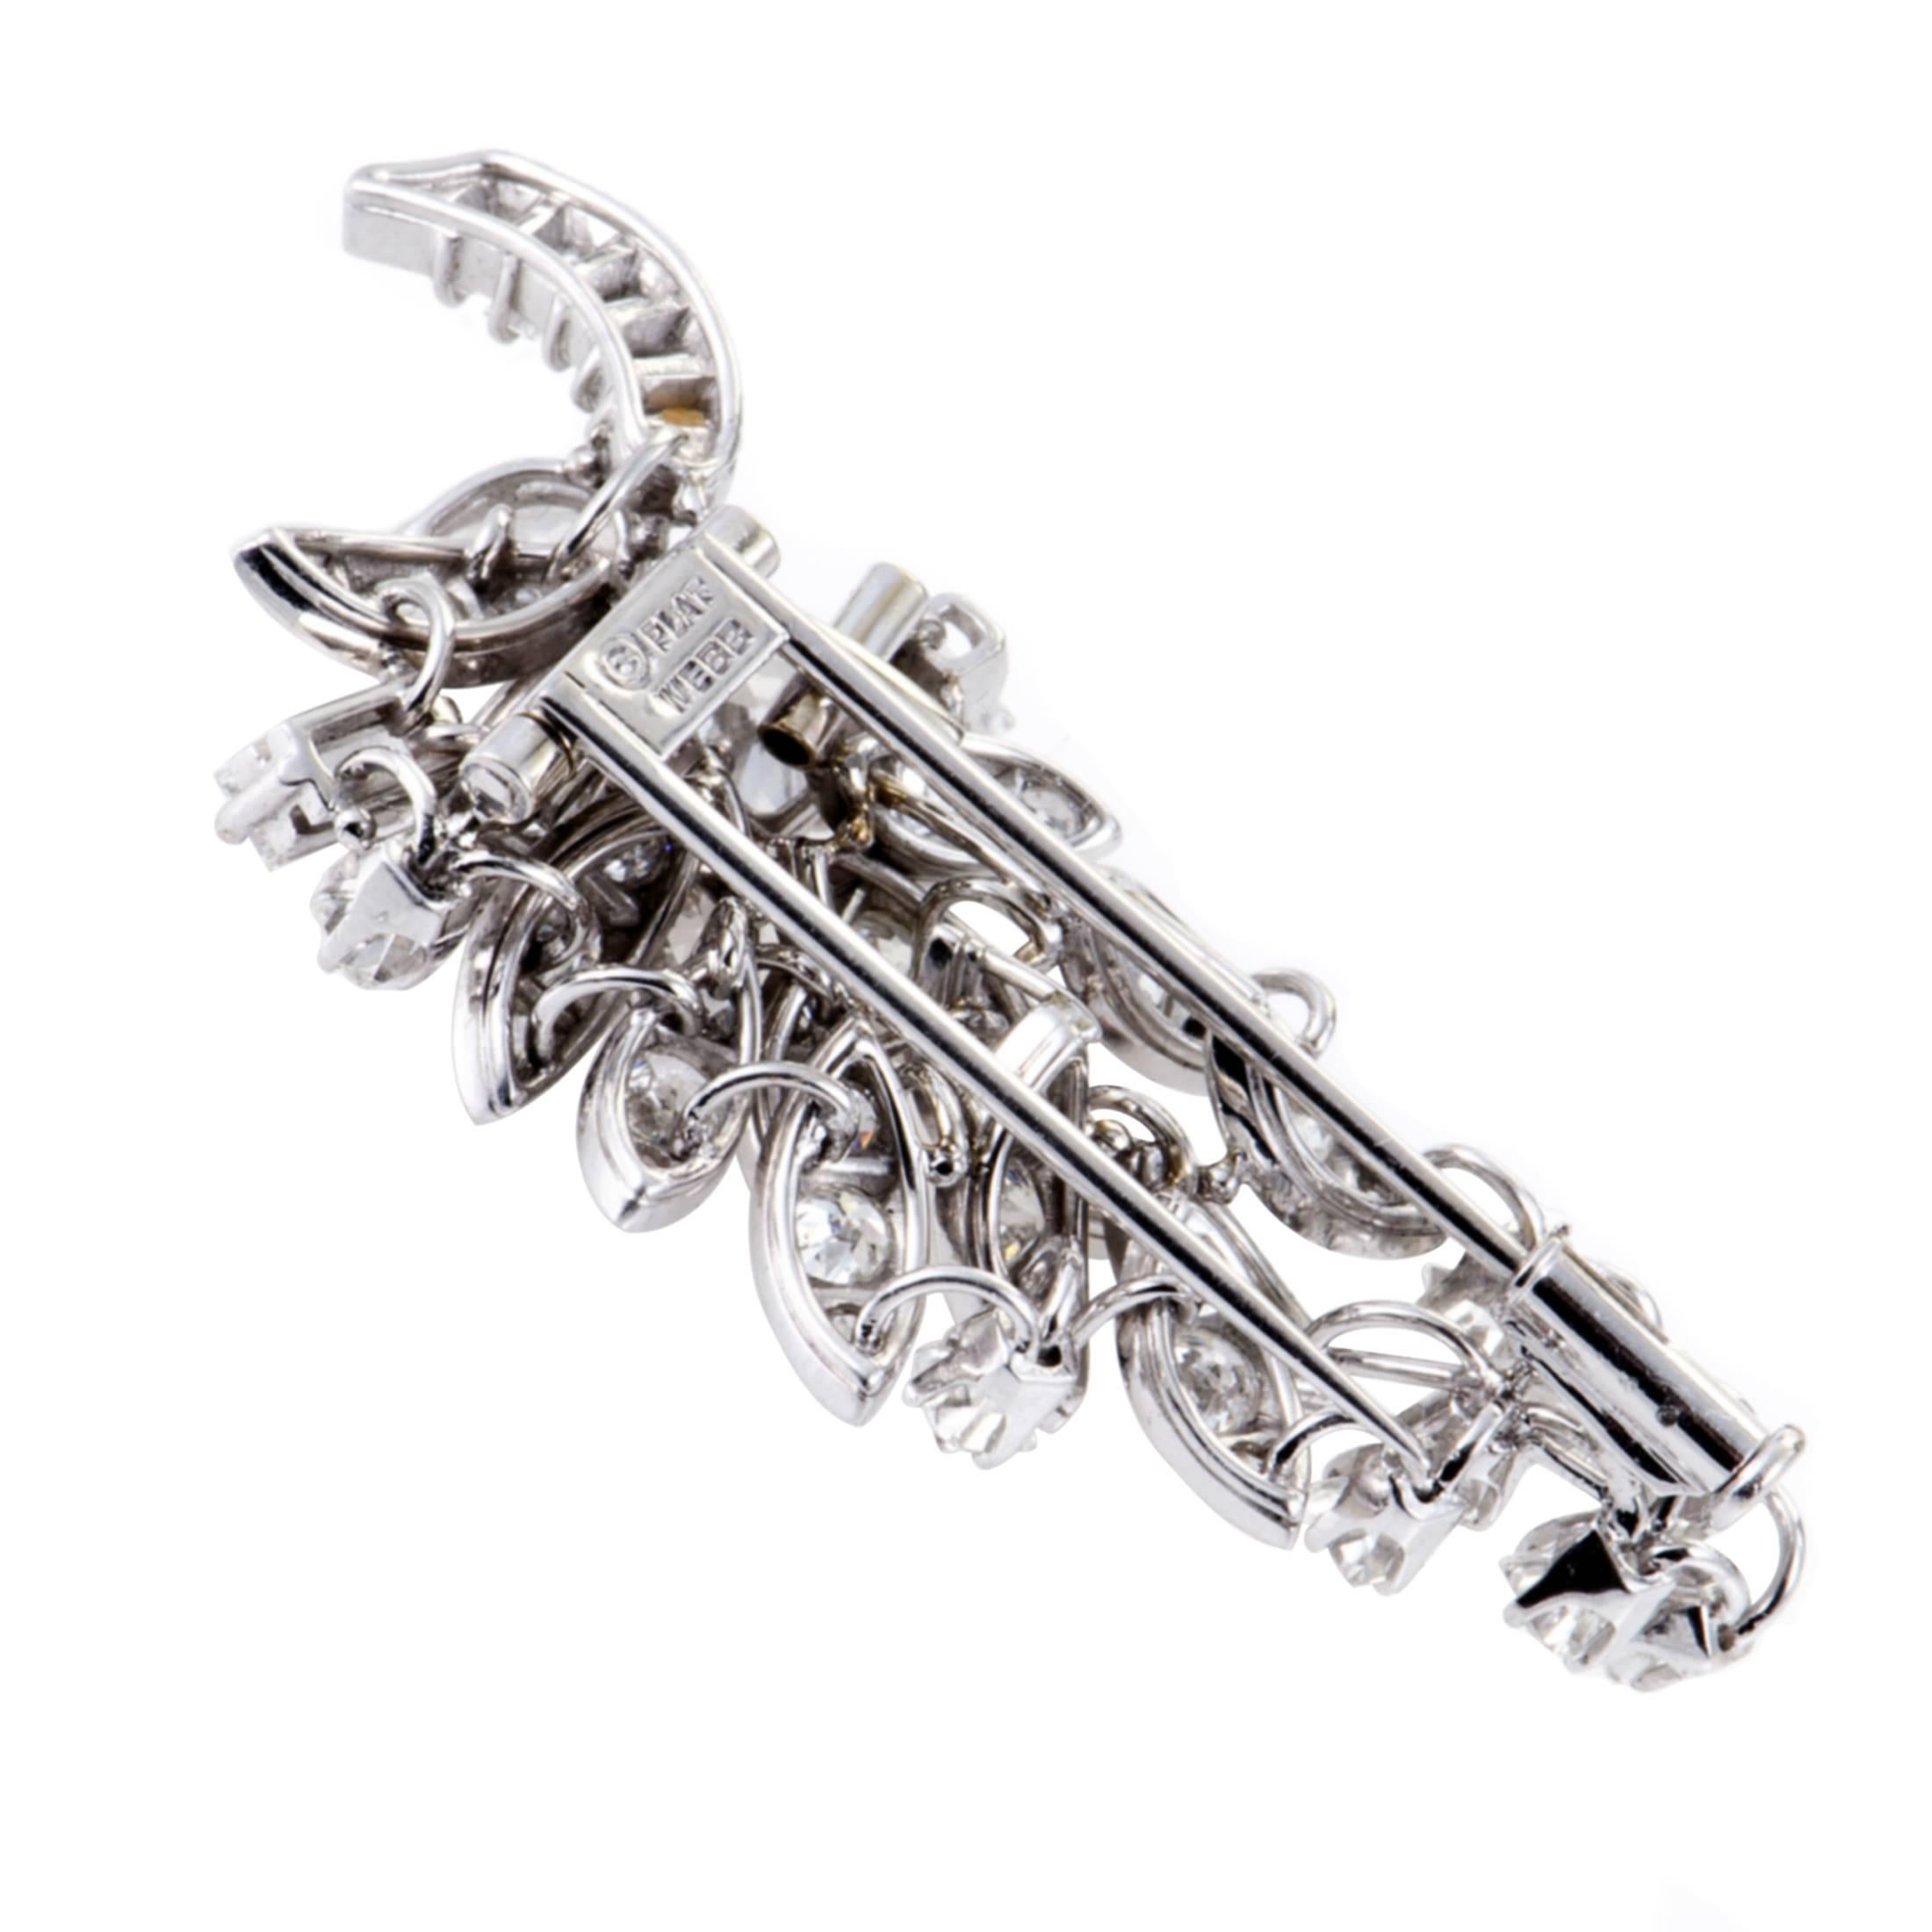 A sight of unblemished prestige and glamorous resplendence, this amazing brooch from David Webb is made of gleaming platinum and embellished with dazzling F-color diamonds of VS clarity weighing in total approximately 5.50 carats.